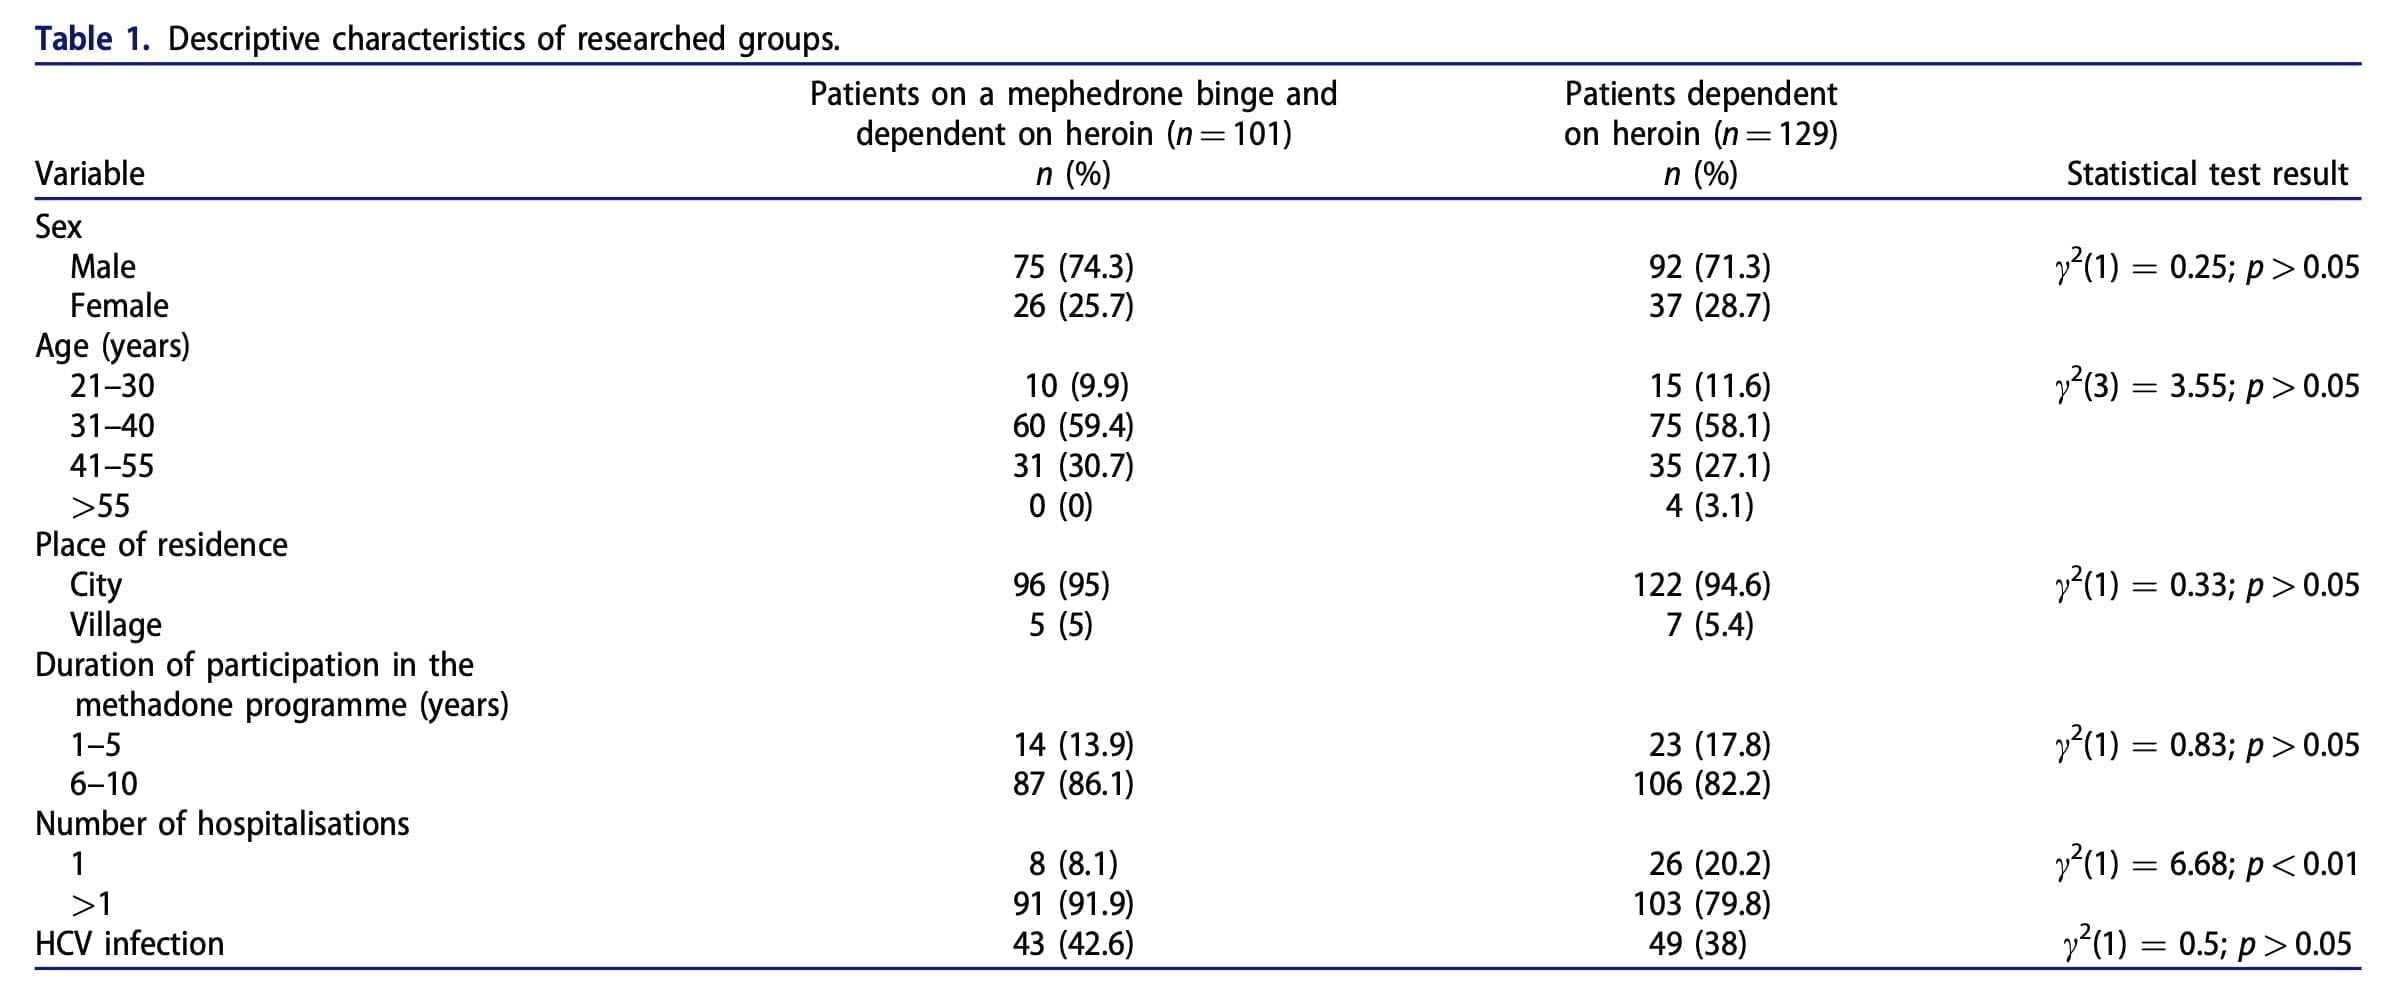 <strong>The effectiveness of the methadone program in treating mephedrone addiction</strong>